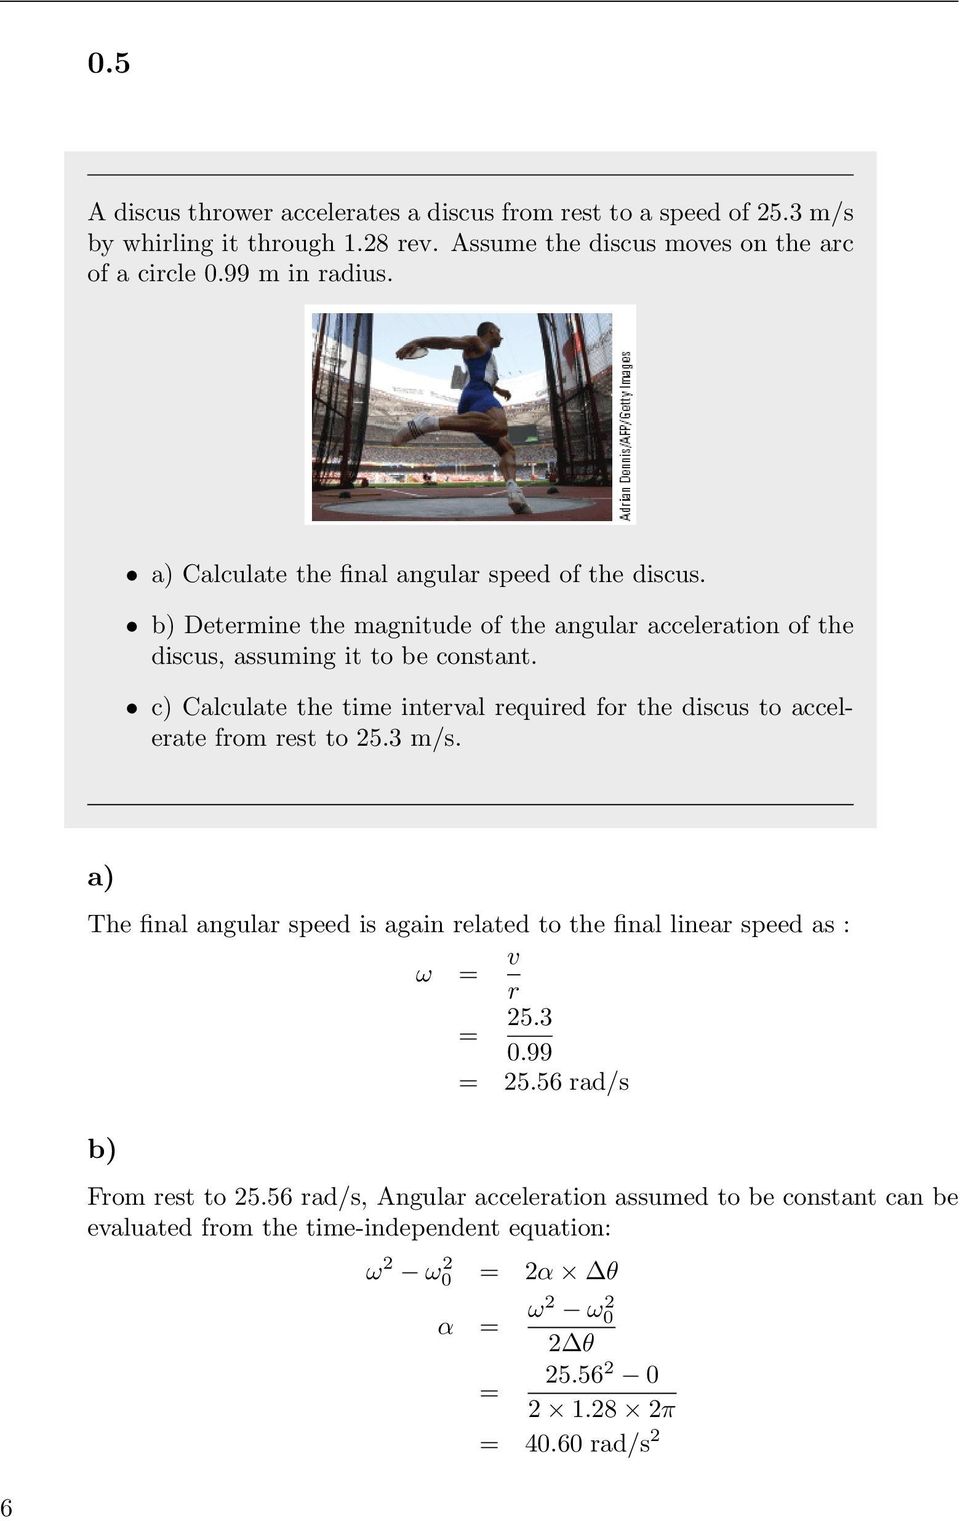 c) Calculate the time interval required for the discus to accelerate from rest to 25.3 m/s.